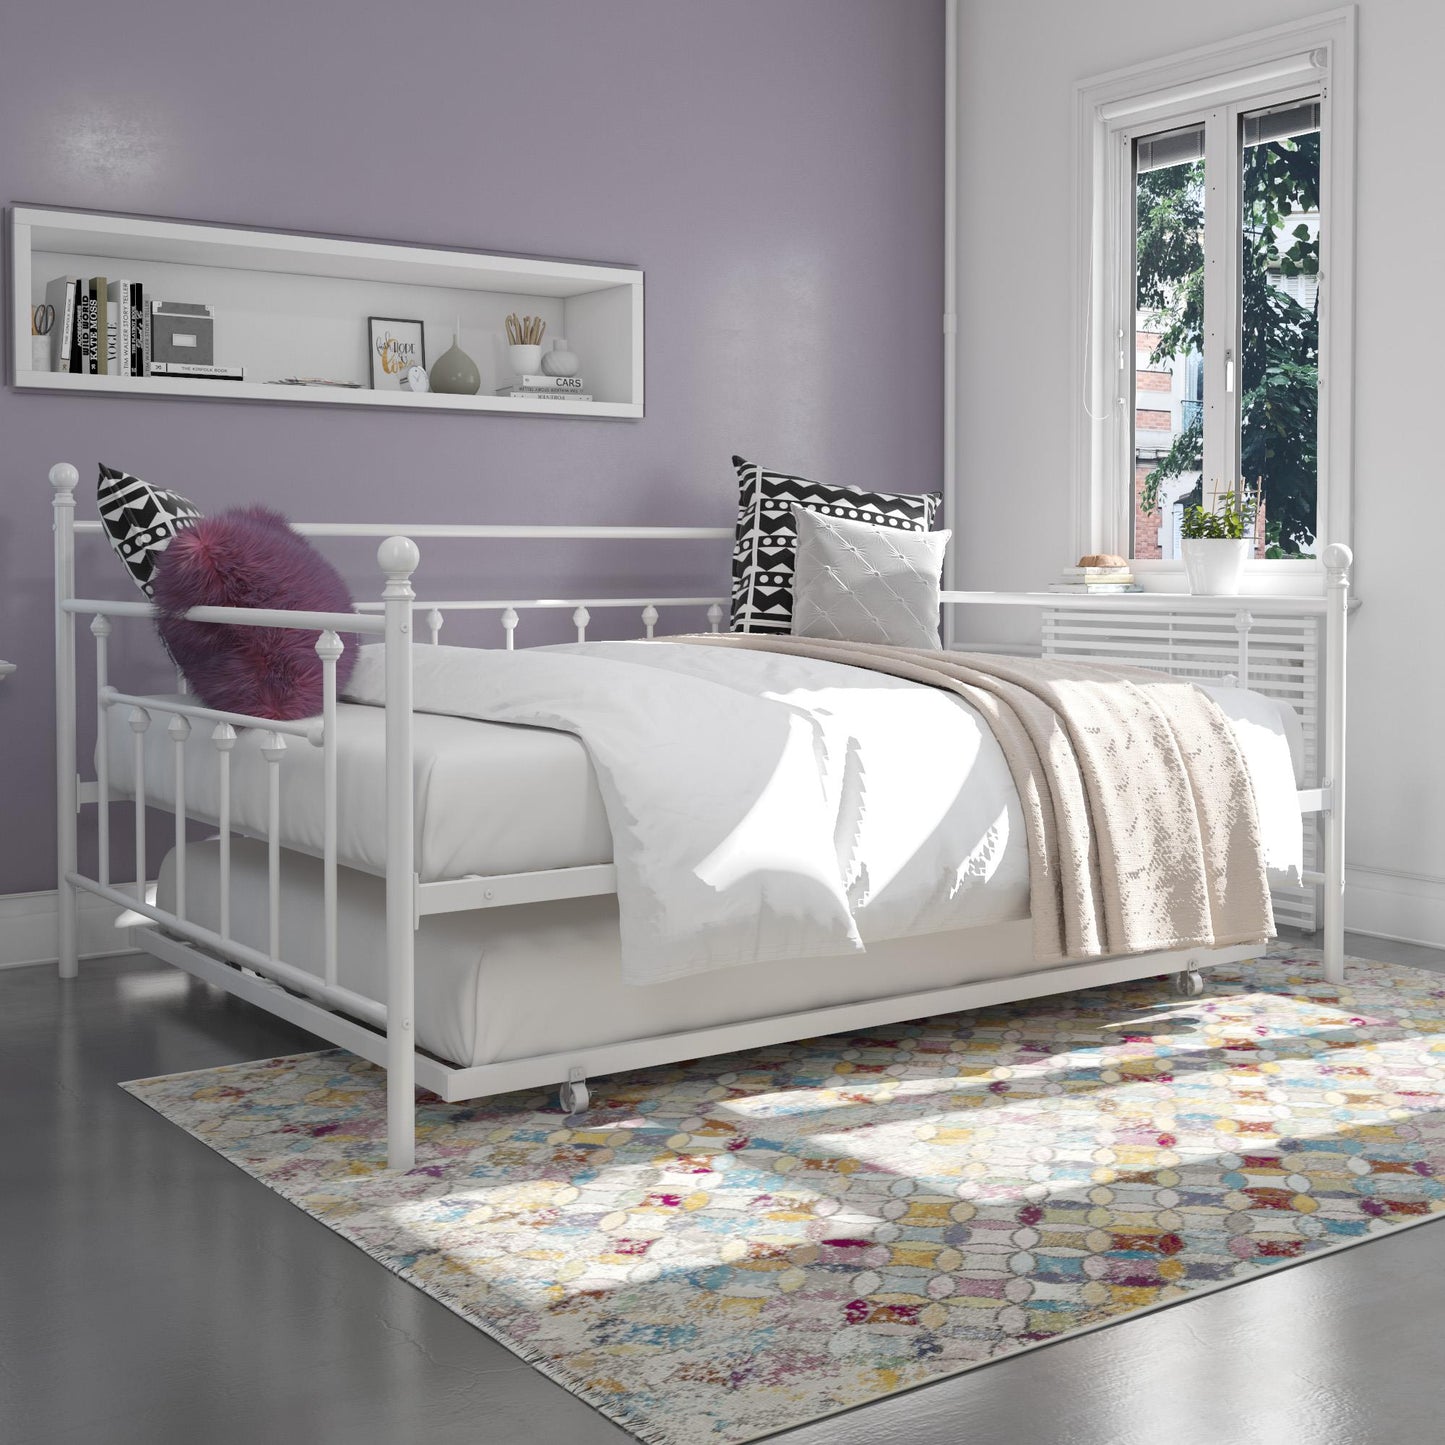 Manila Metal Daybed and Trundle Set with Sturdy Metal Frame and Slats - White - Queen